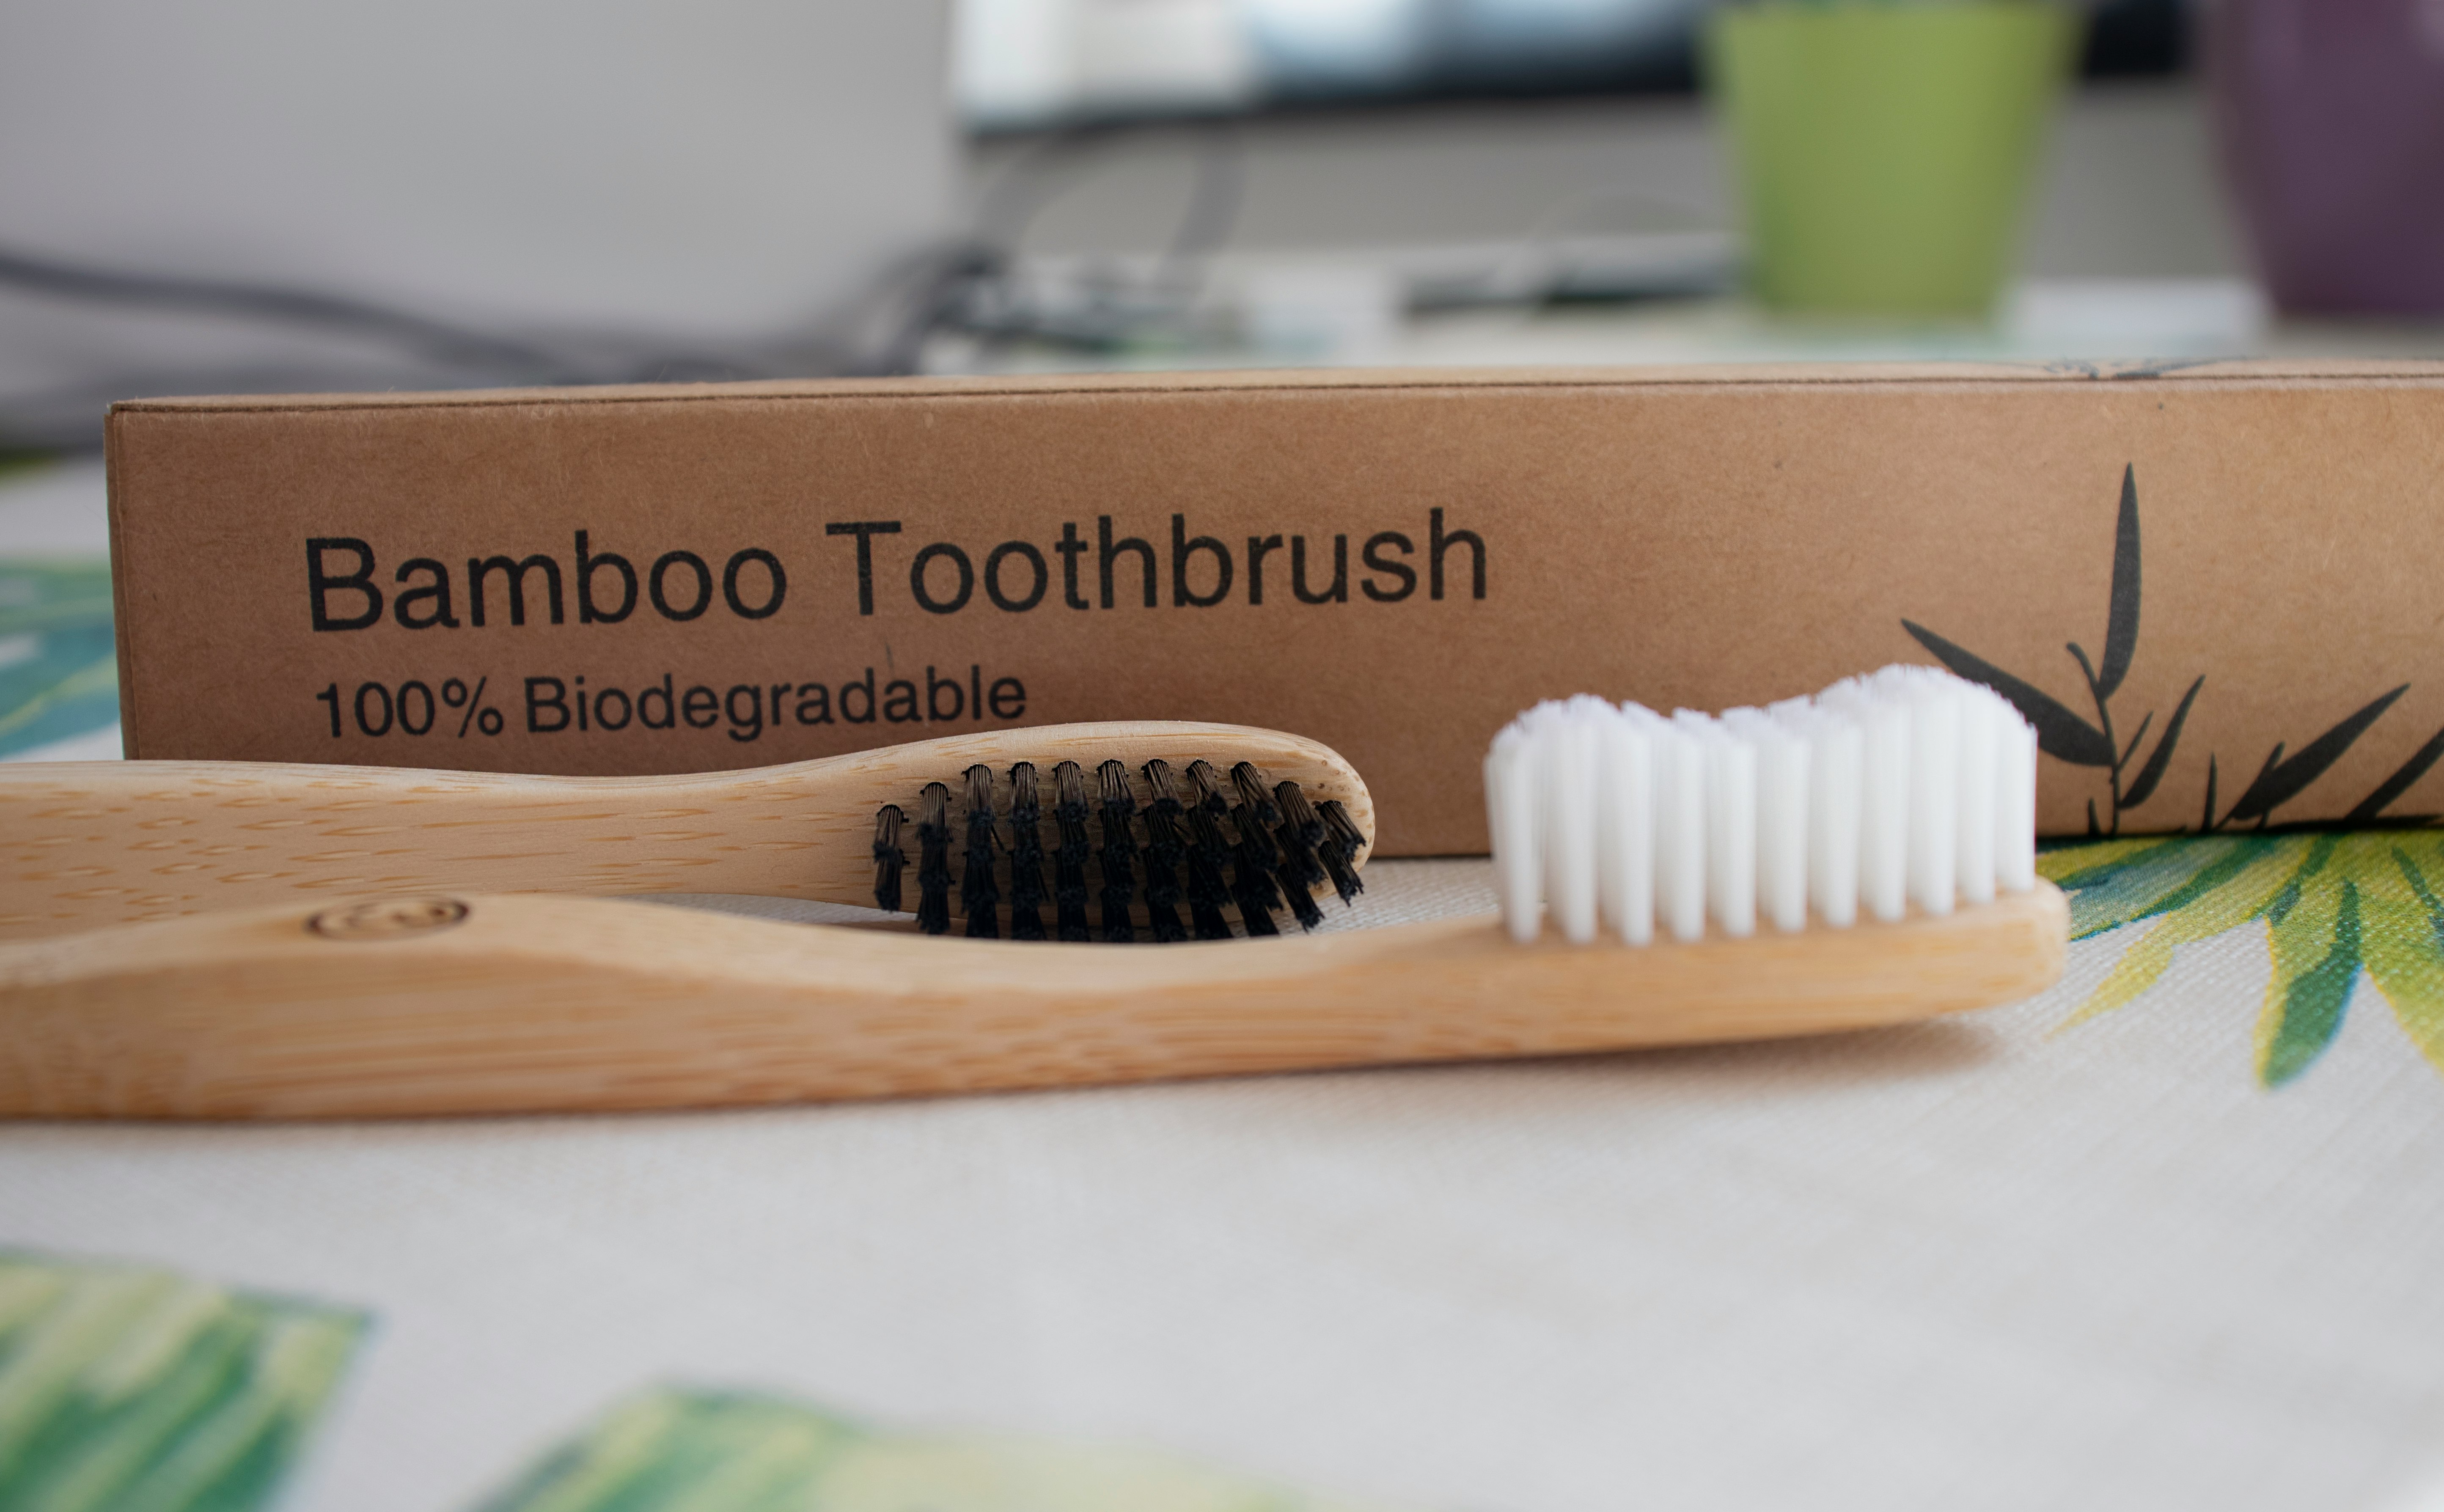 Bamboo Toothbrush Pack/></p>
<p> </p>
<h2>Did you Know this About YOUR Plastic Toothbrush?</h2>
<p>It is estimated that <a href=